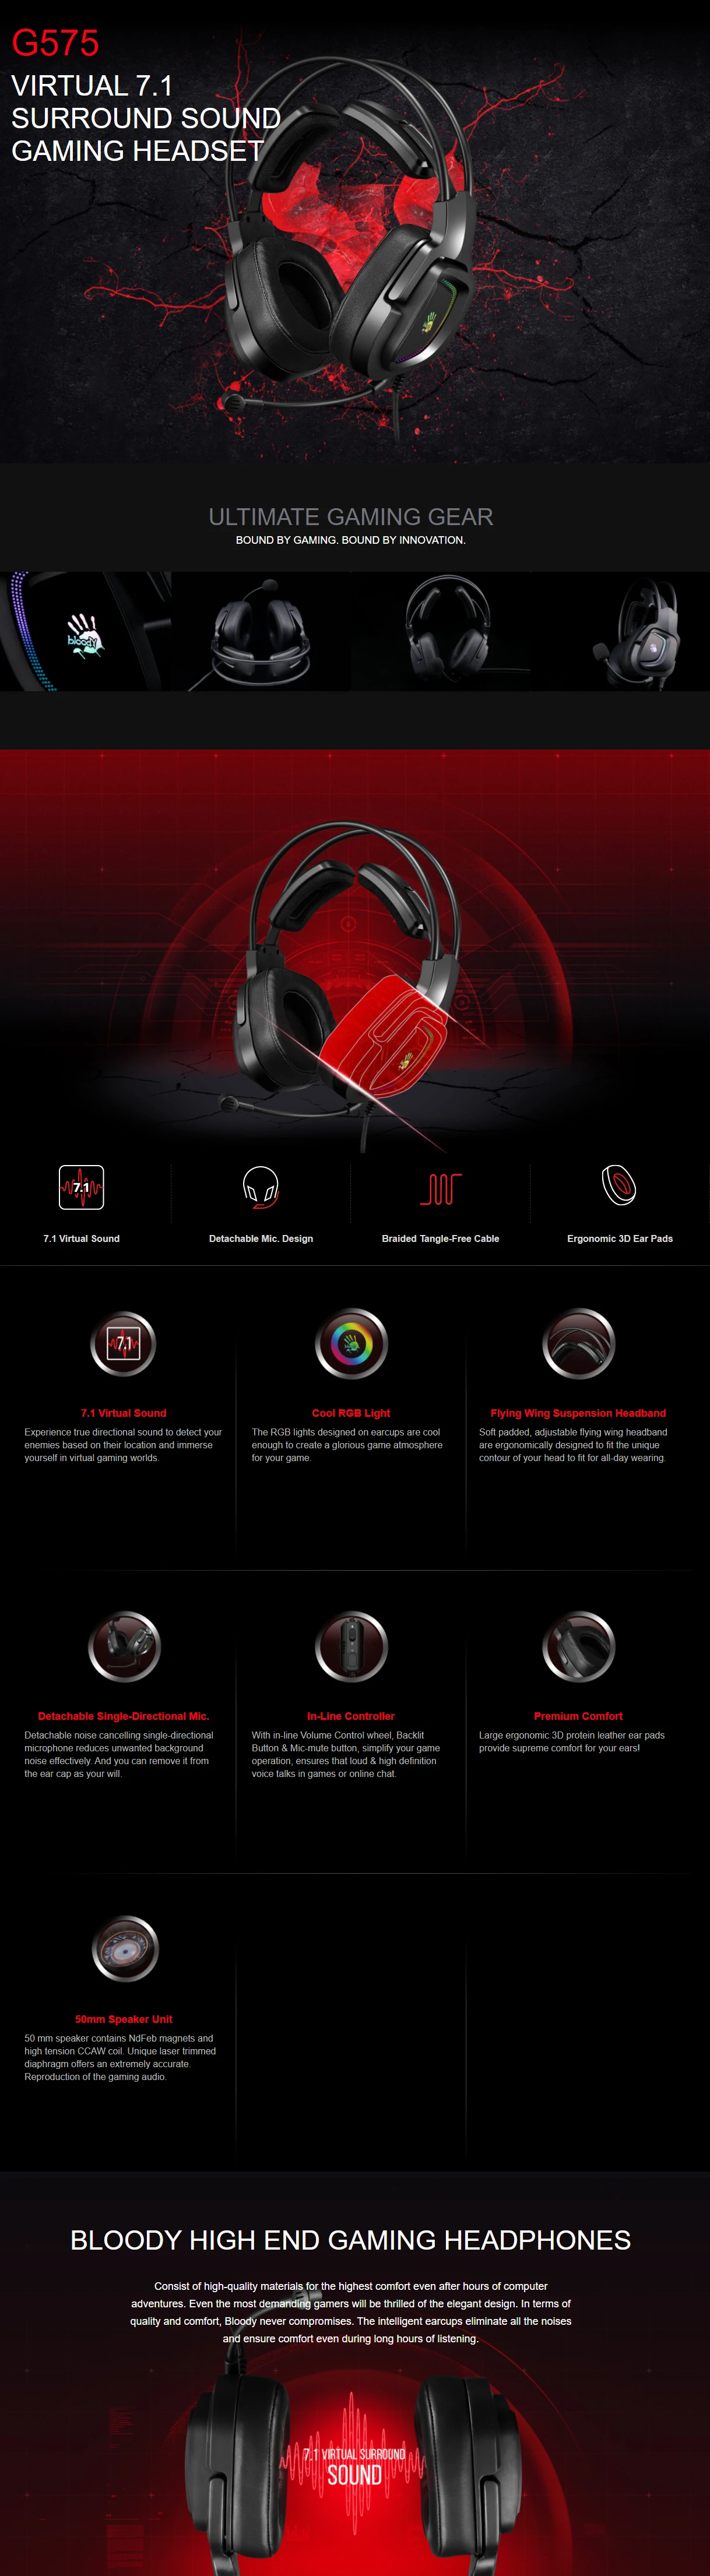 Overview - Bloody - G575 Virtual 7.1 Surround Sound Gaming Headphones